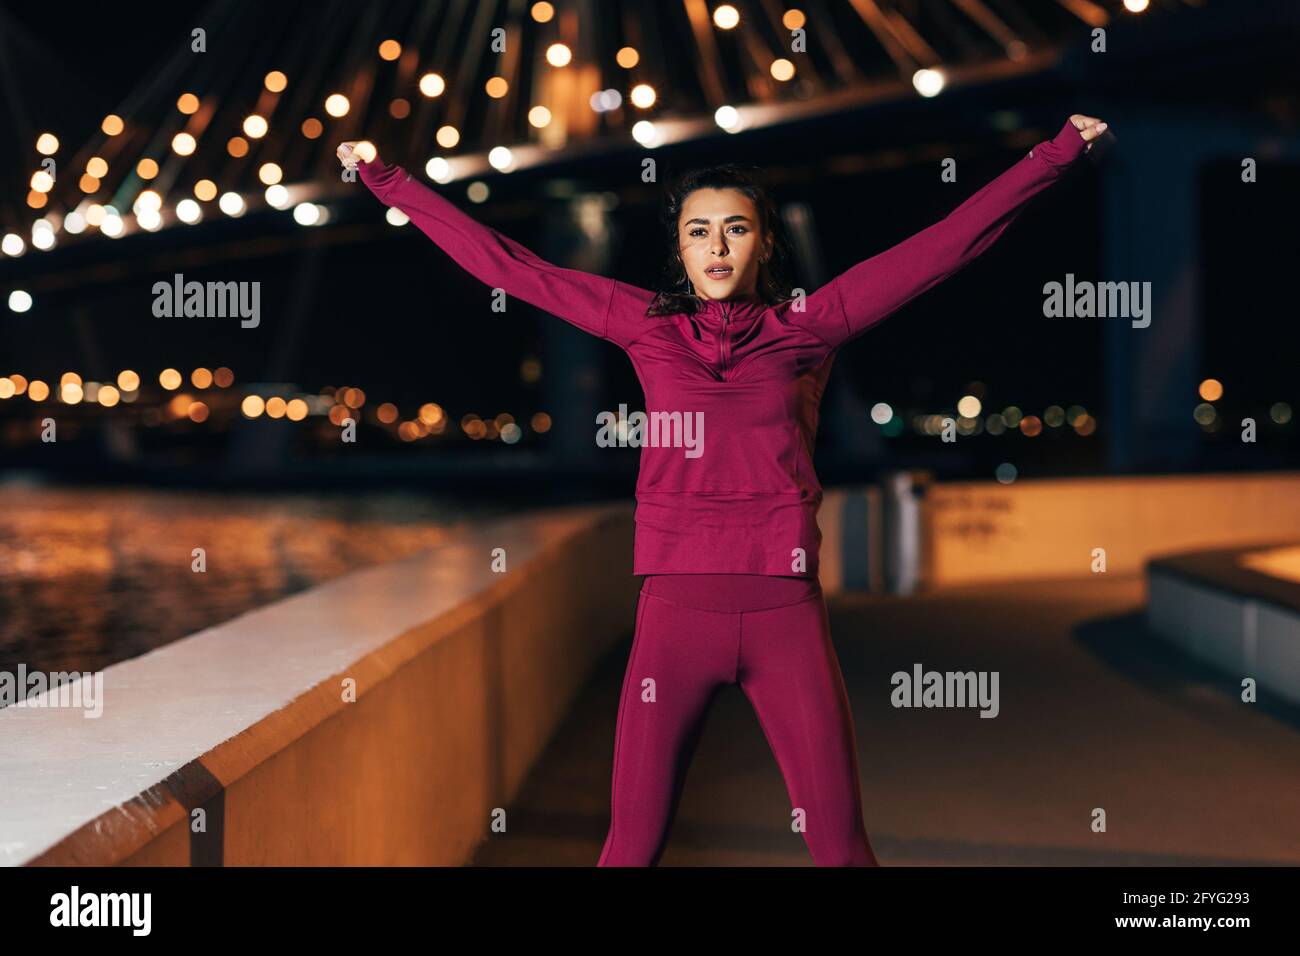 Young middle eastern woman in sports clothes doing warming up exercises outdoors Stock Photo